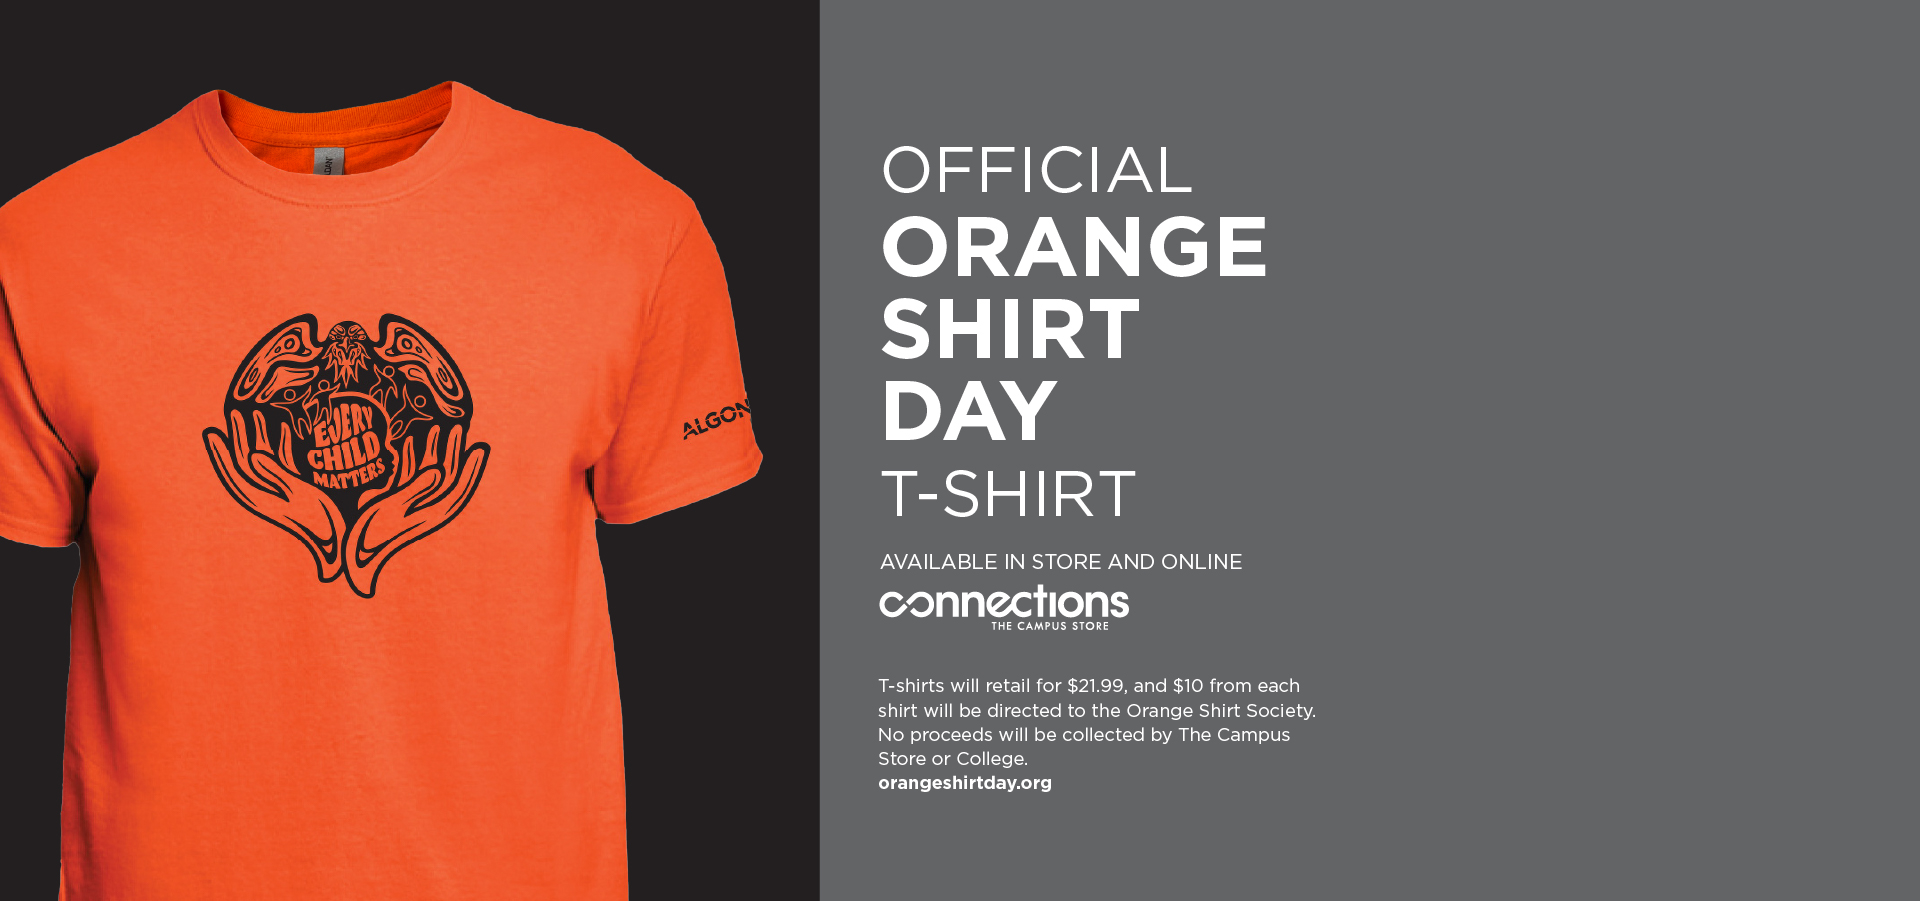 Official Orange Shirt Day T-shirt available in store and online. T-shirts will retail for $21.99 and $10 from each shirt will be directed to the Orange Shirt Society. No proceeds will be collected by the The Campus Store or College. Visit orangeshirtday.org